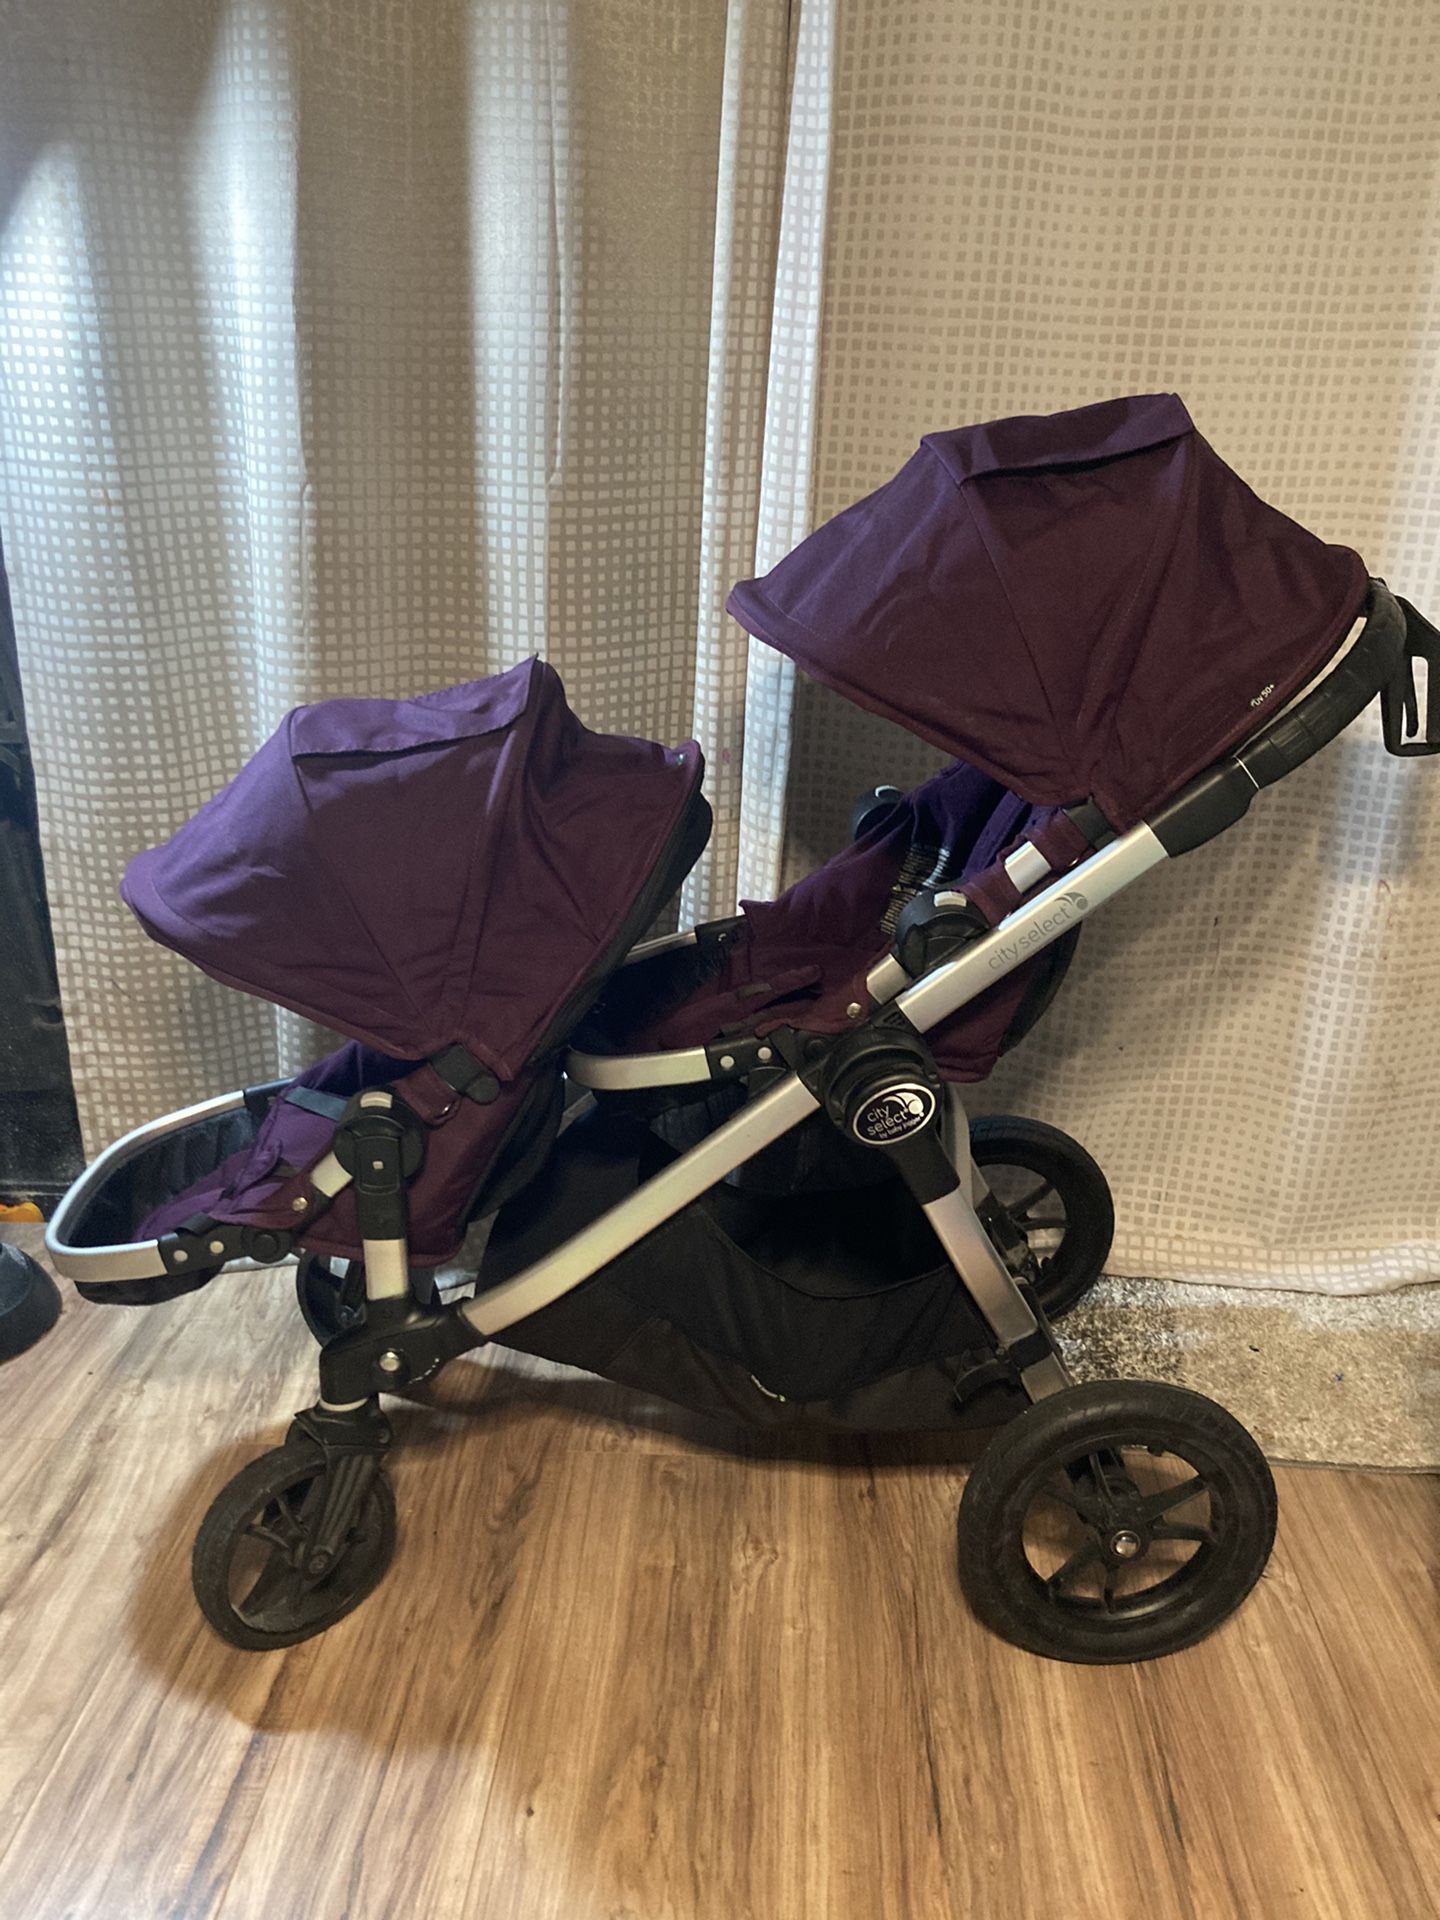 Stroller Baby Jogger City Select double tandem stroller in purple